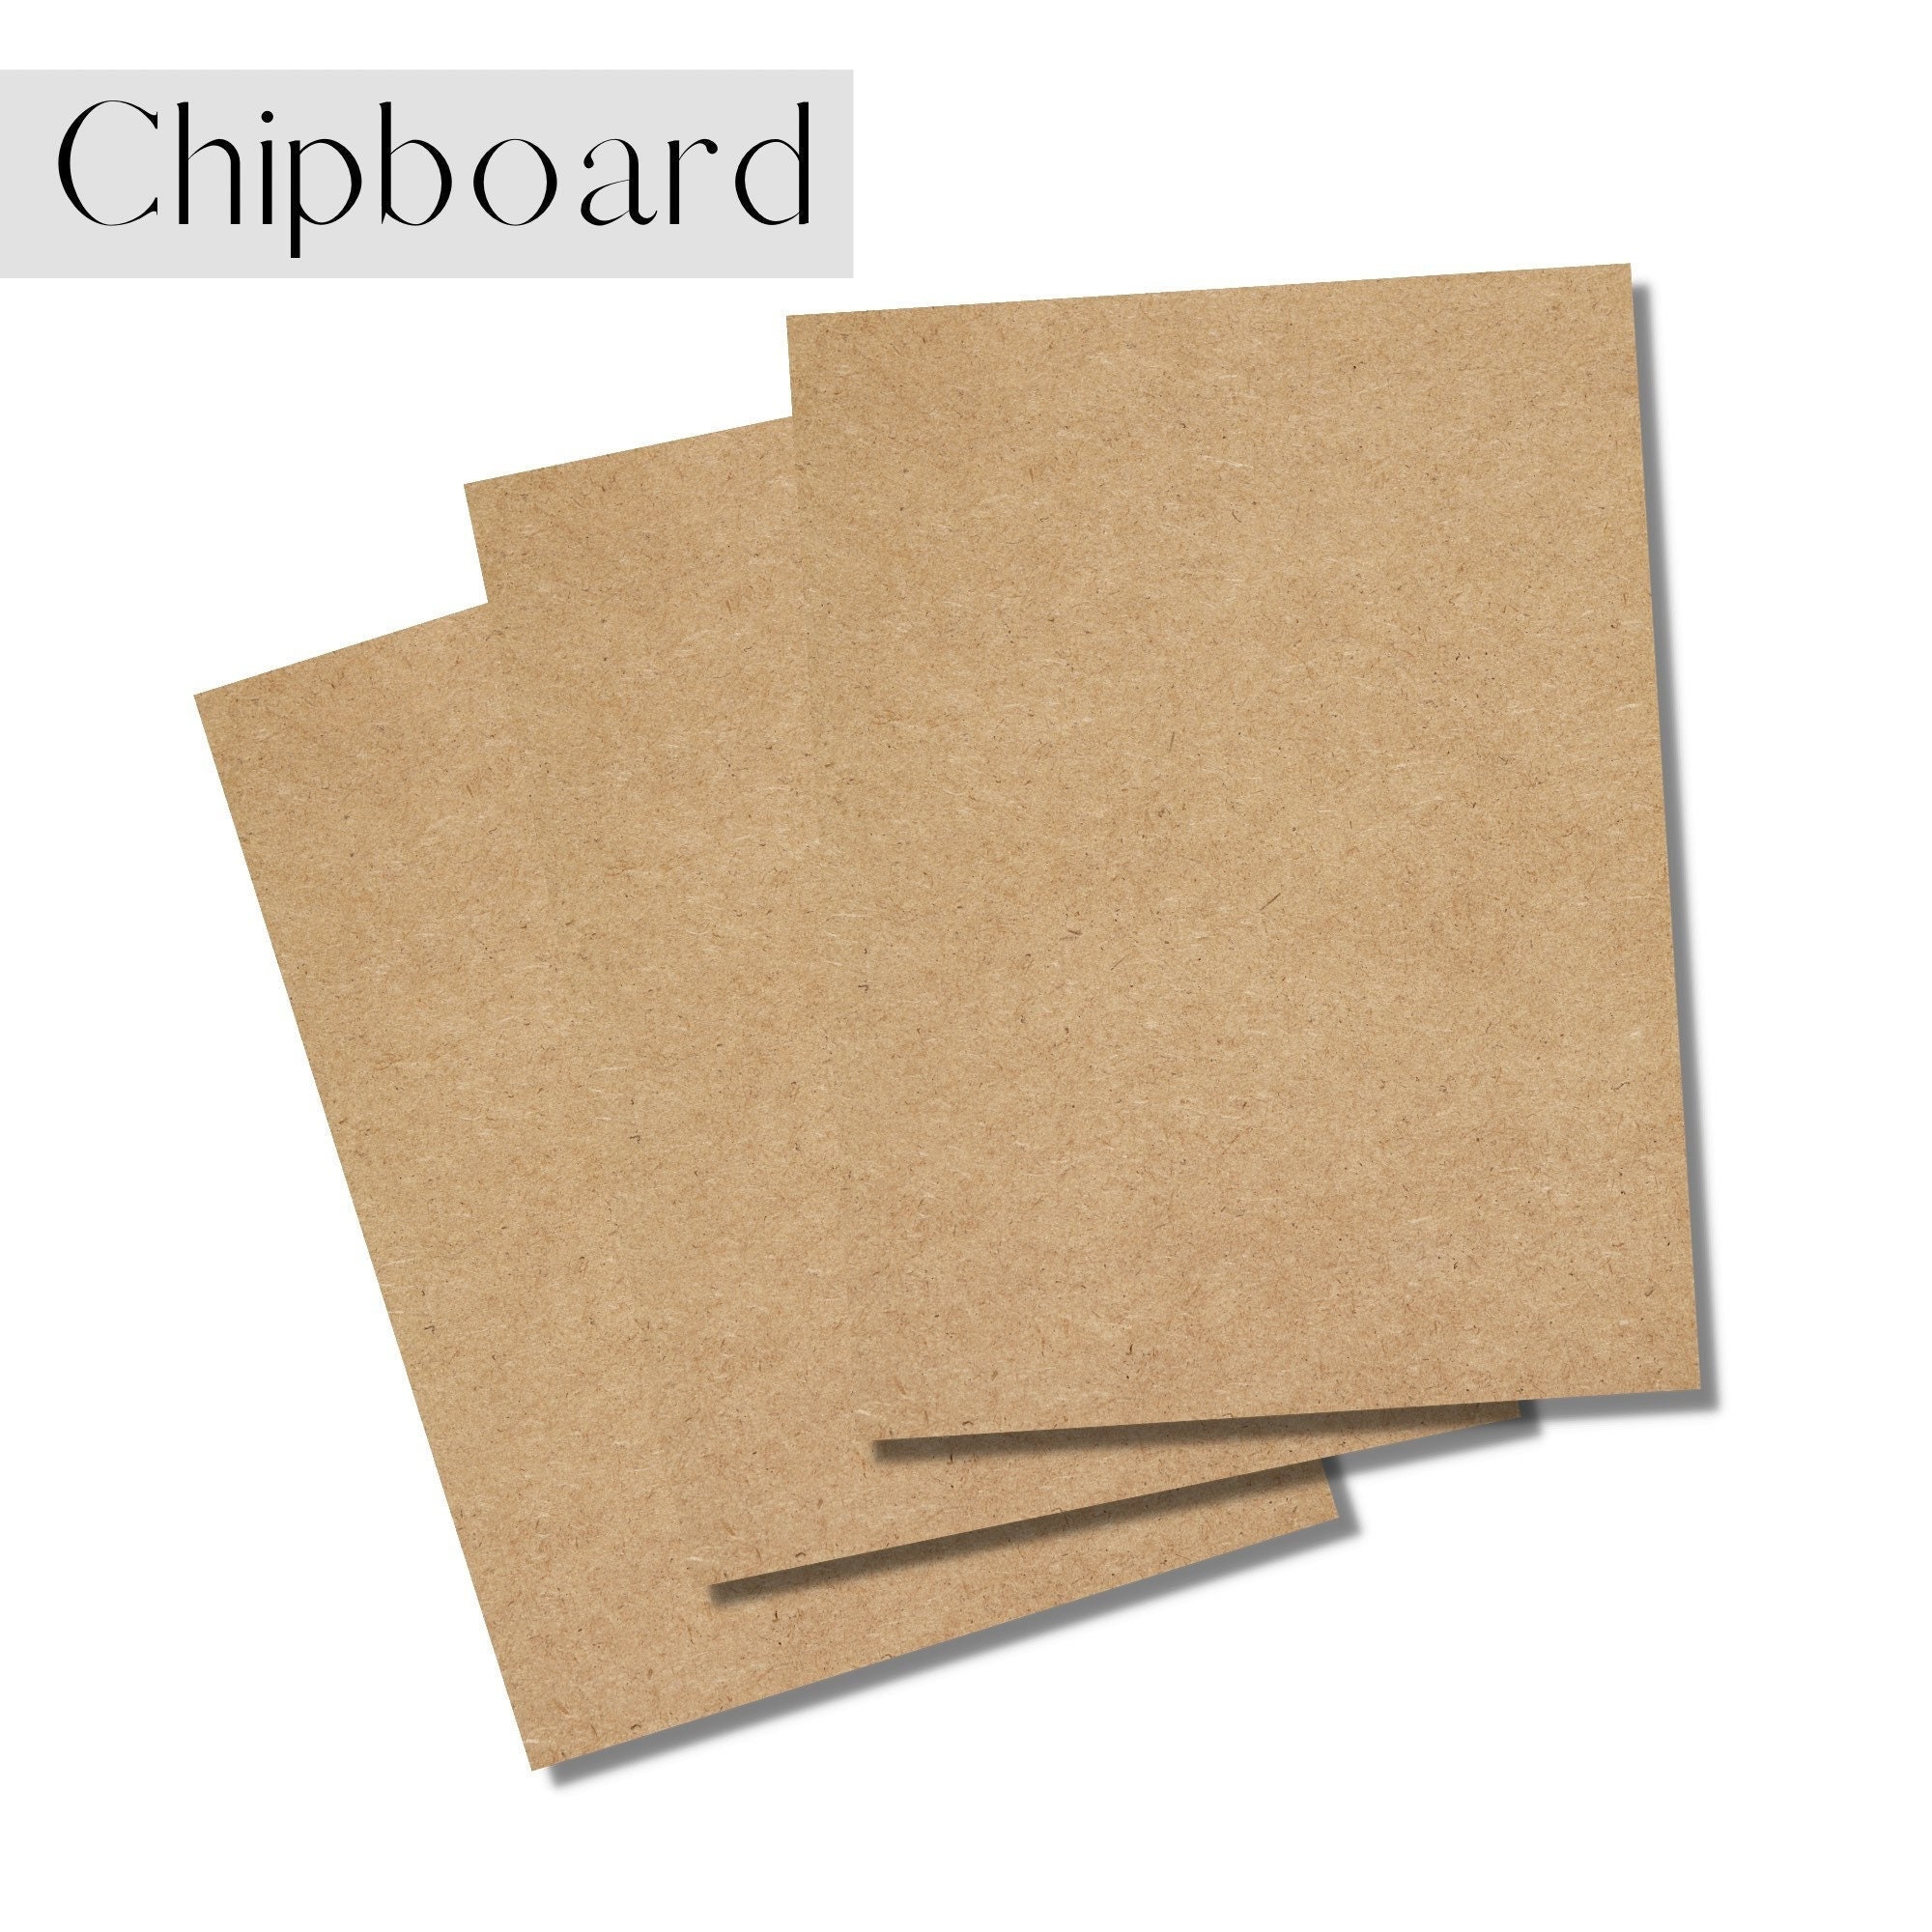 40 Sheets of Kraft Colored Chipboard Paperboard for Cricut and